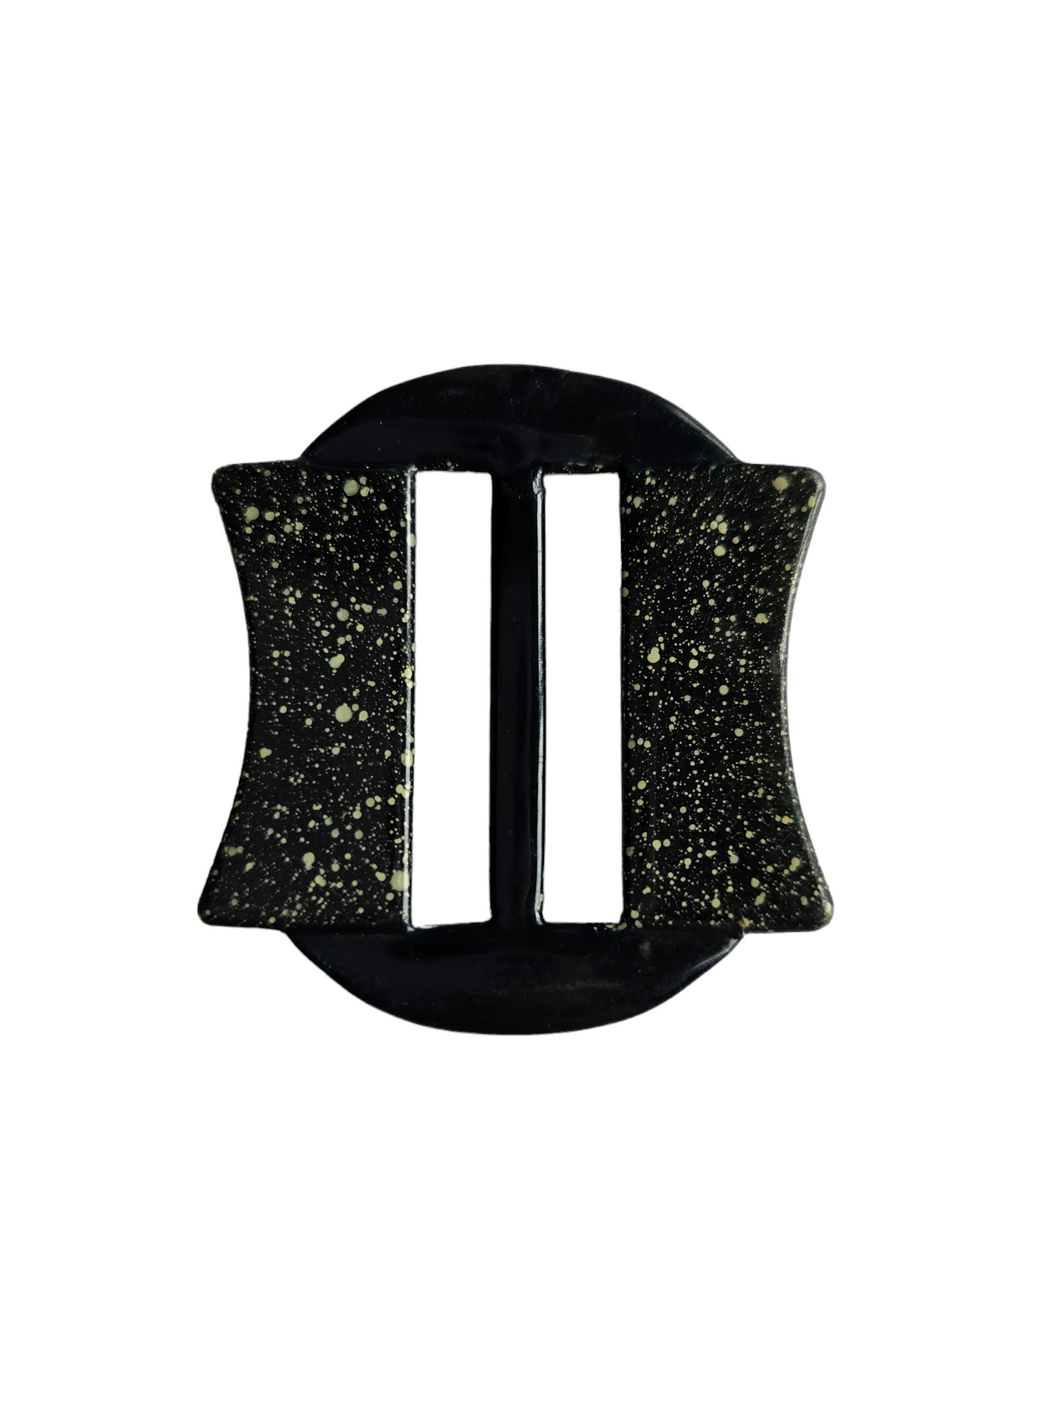 1930s Deco Black Speckled Celluloid Buckle